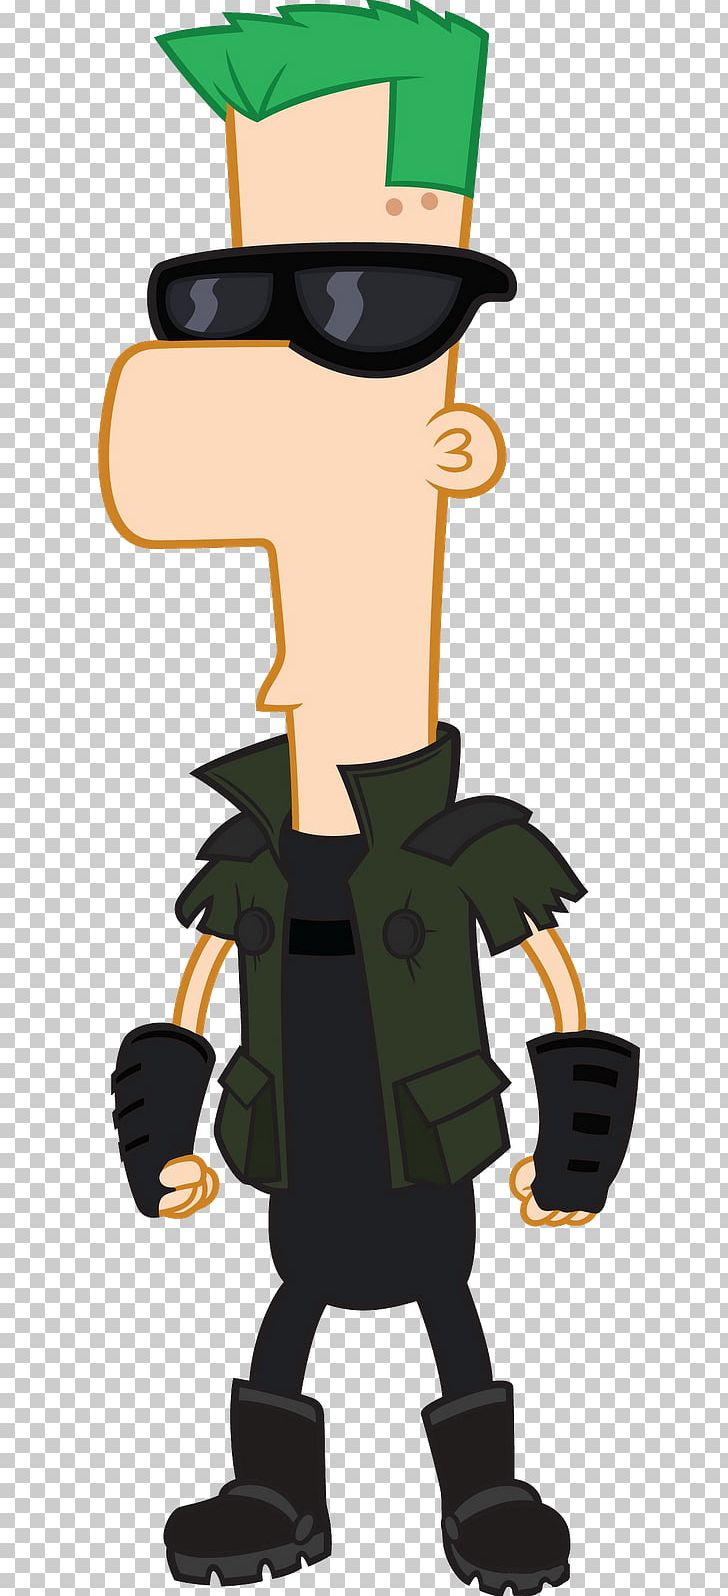 Ferb Fletcher Phineas Flynn Candace Flynn Dr. Heinz Doofenshmirtz Phineas And Ferb: Across The 2nd Dimension PNG, Clipart, Cartoon, Dimension, Fictional Character, Film, Miscellaneous Free PNG Download